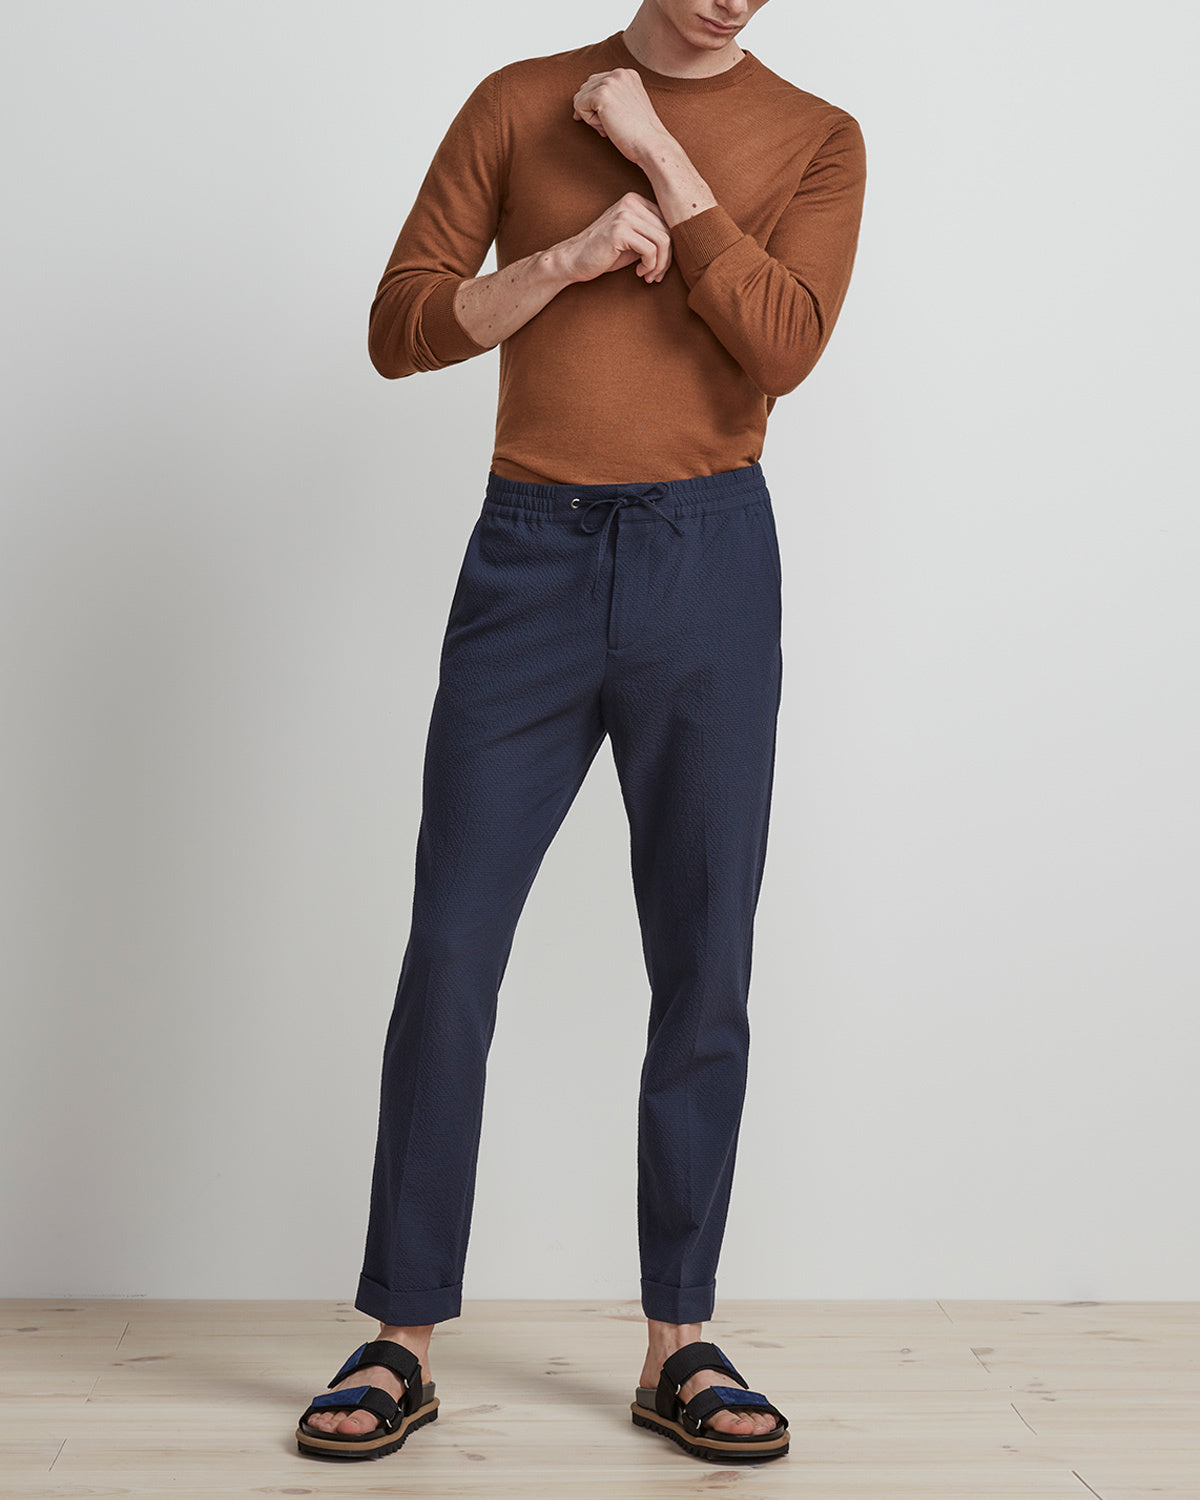 No Nationality Ted Knit - Canela Brown - Mitchell McCabe Menswear